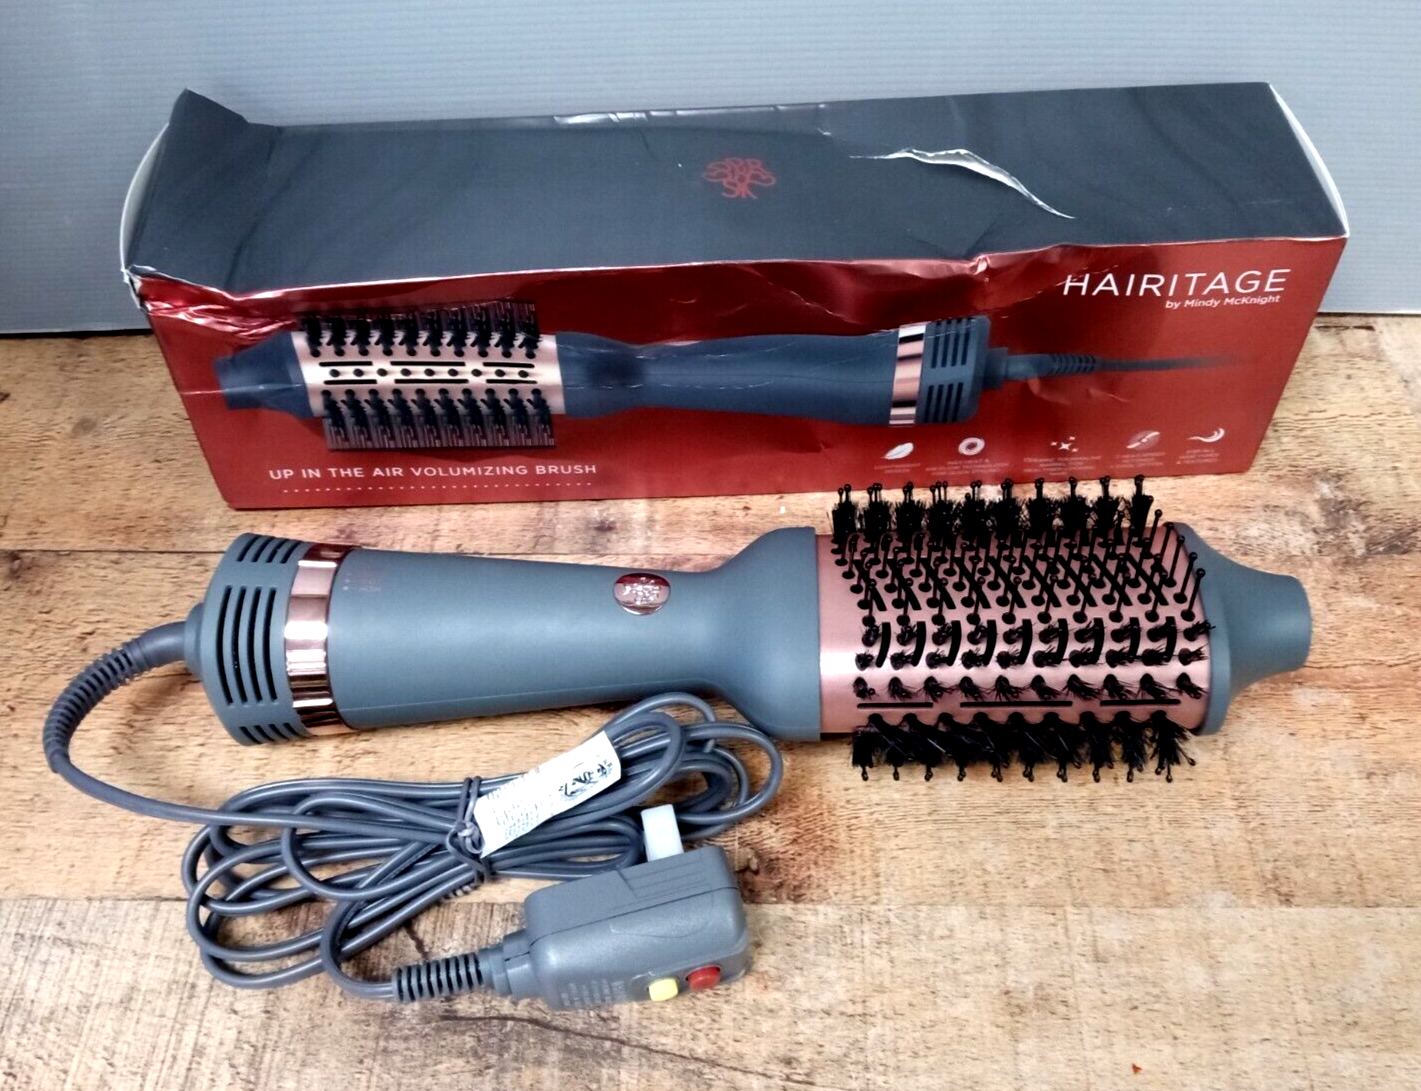 Hairitage Up In The Air Volumizing Brush Hair Dryer for Curling & Straightening - $39.99